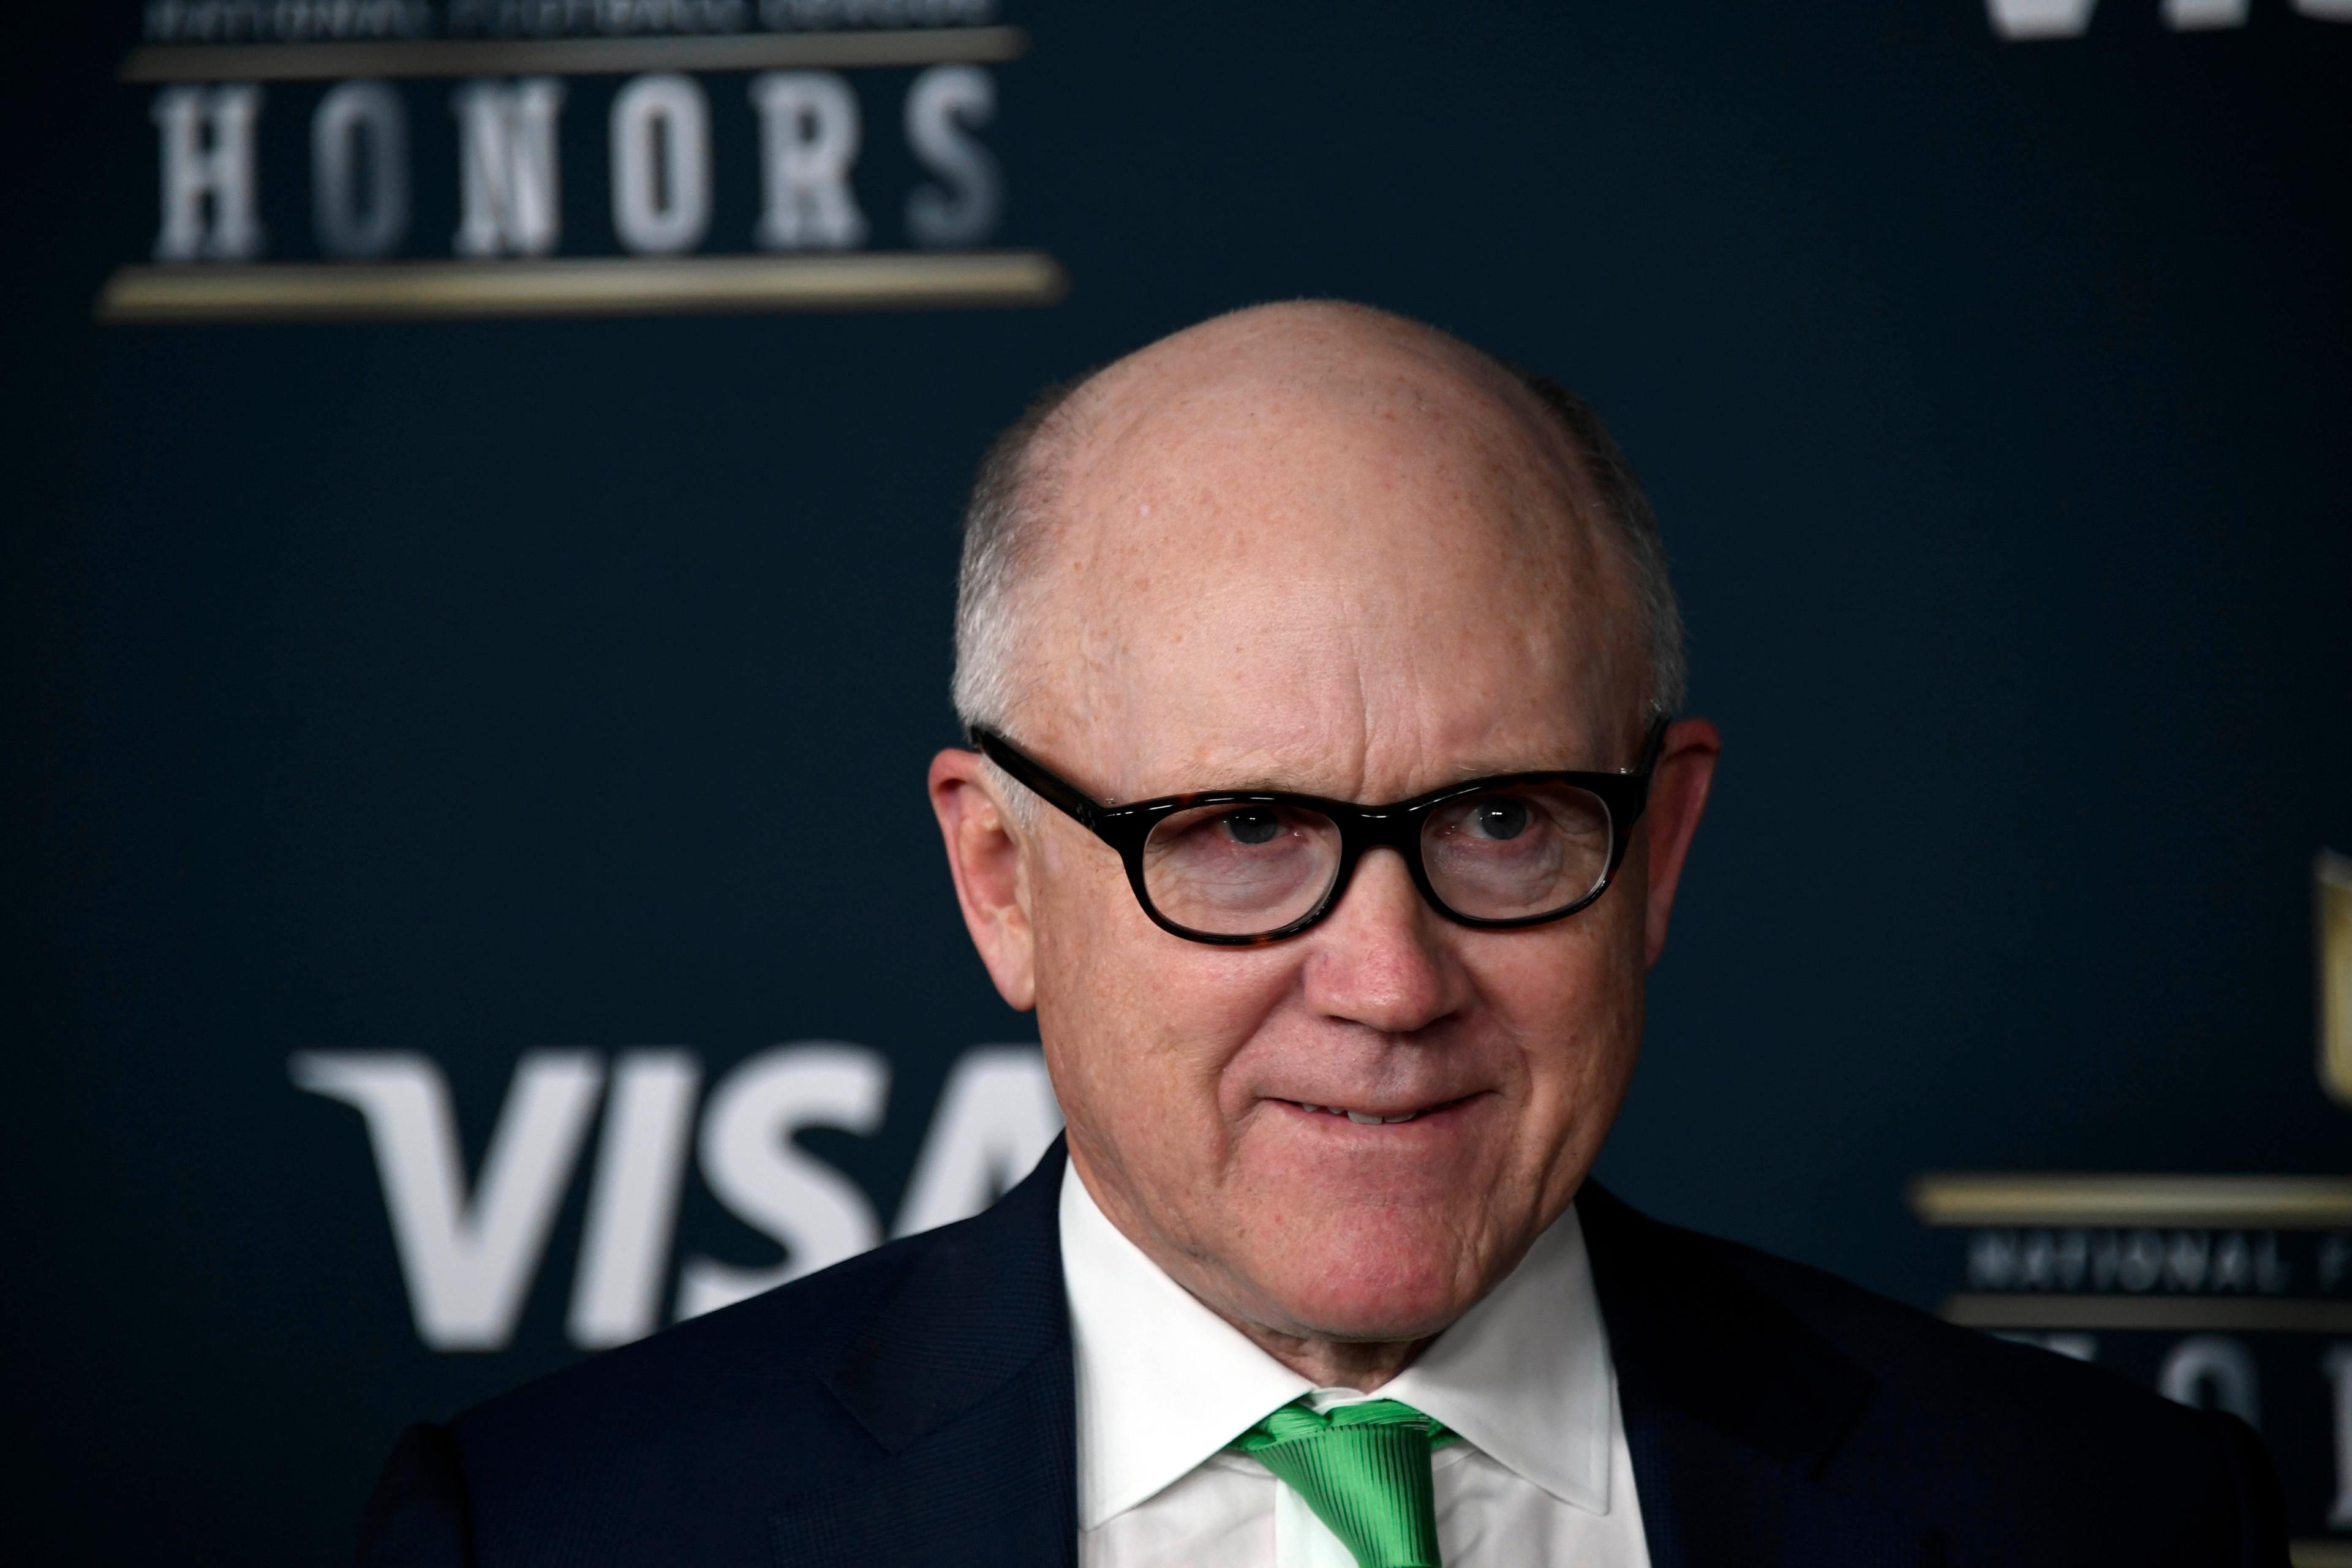 Jets owner Woody Johnson / USA TODAY